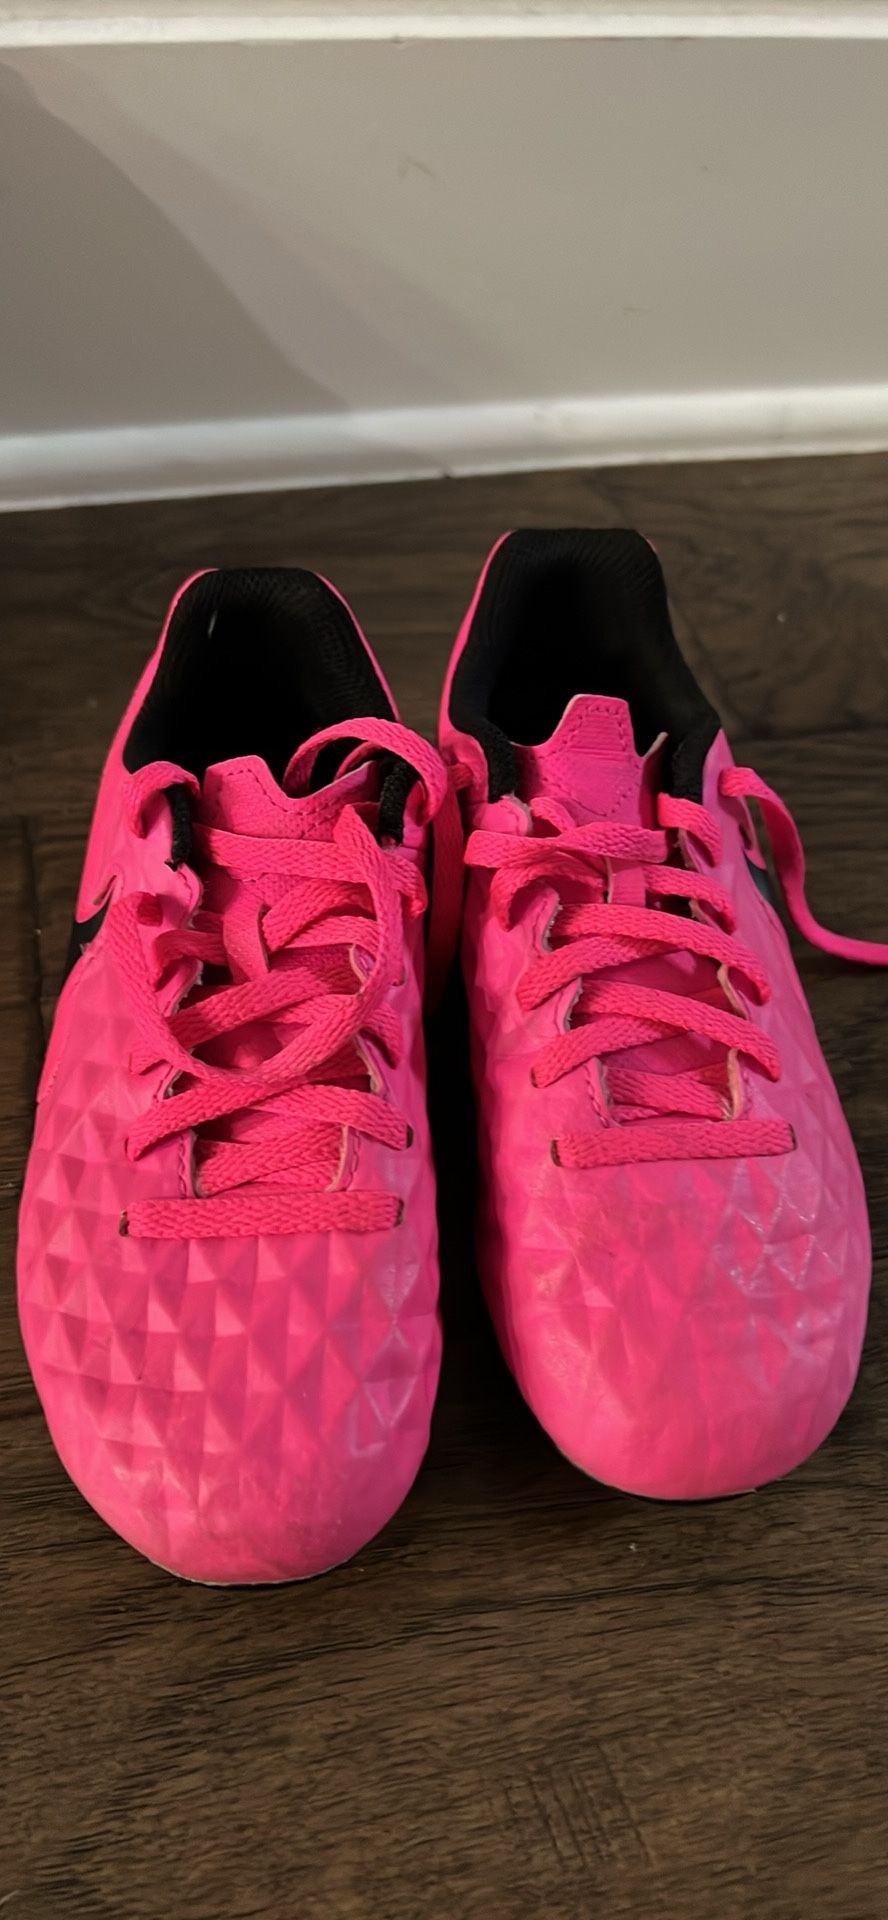 Kids Soccer cleats Pink Nike Tiempo Size 12c